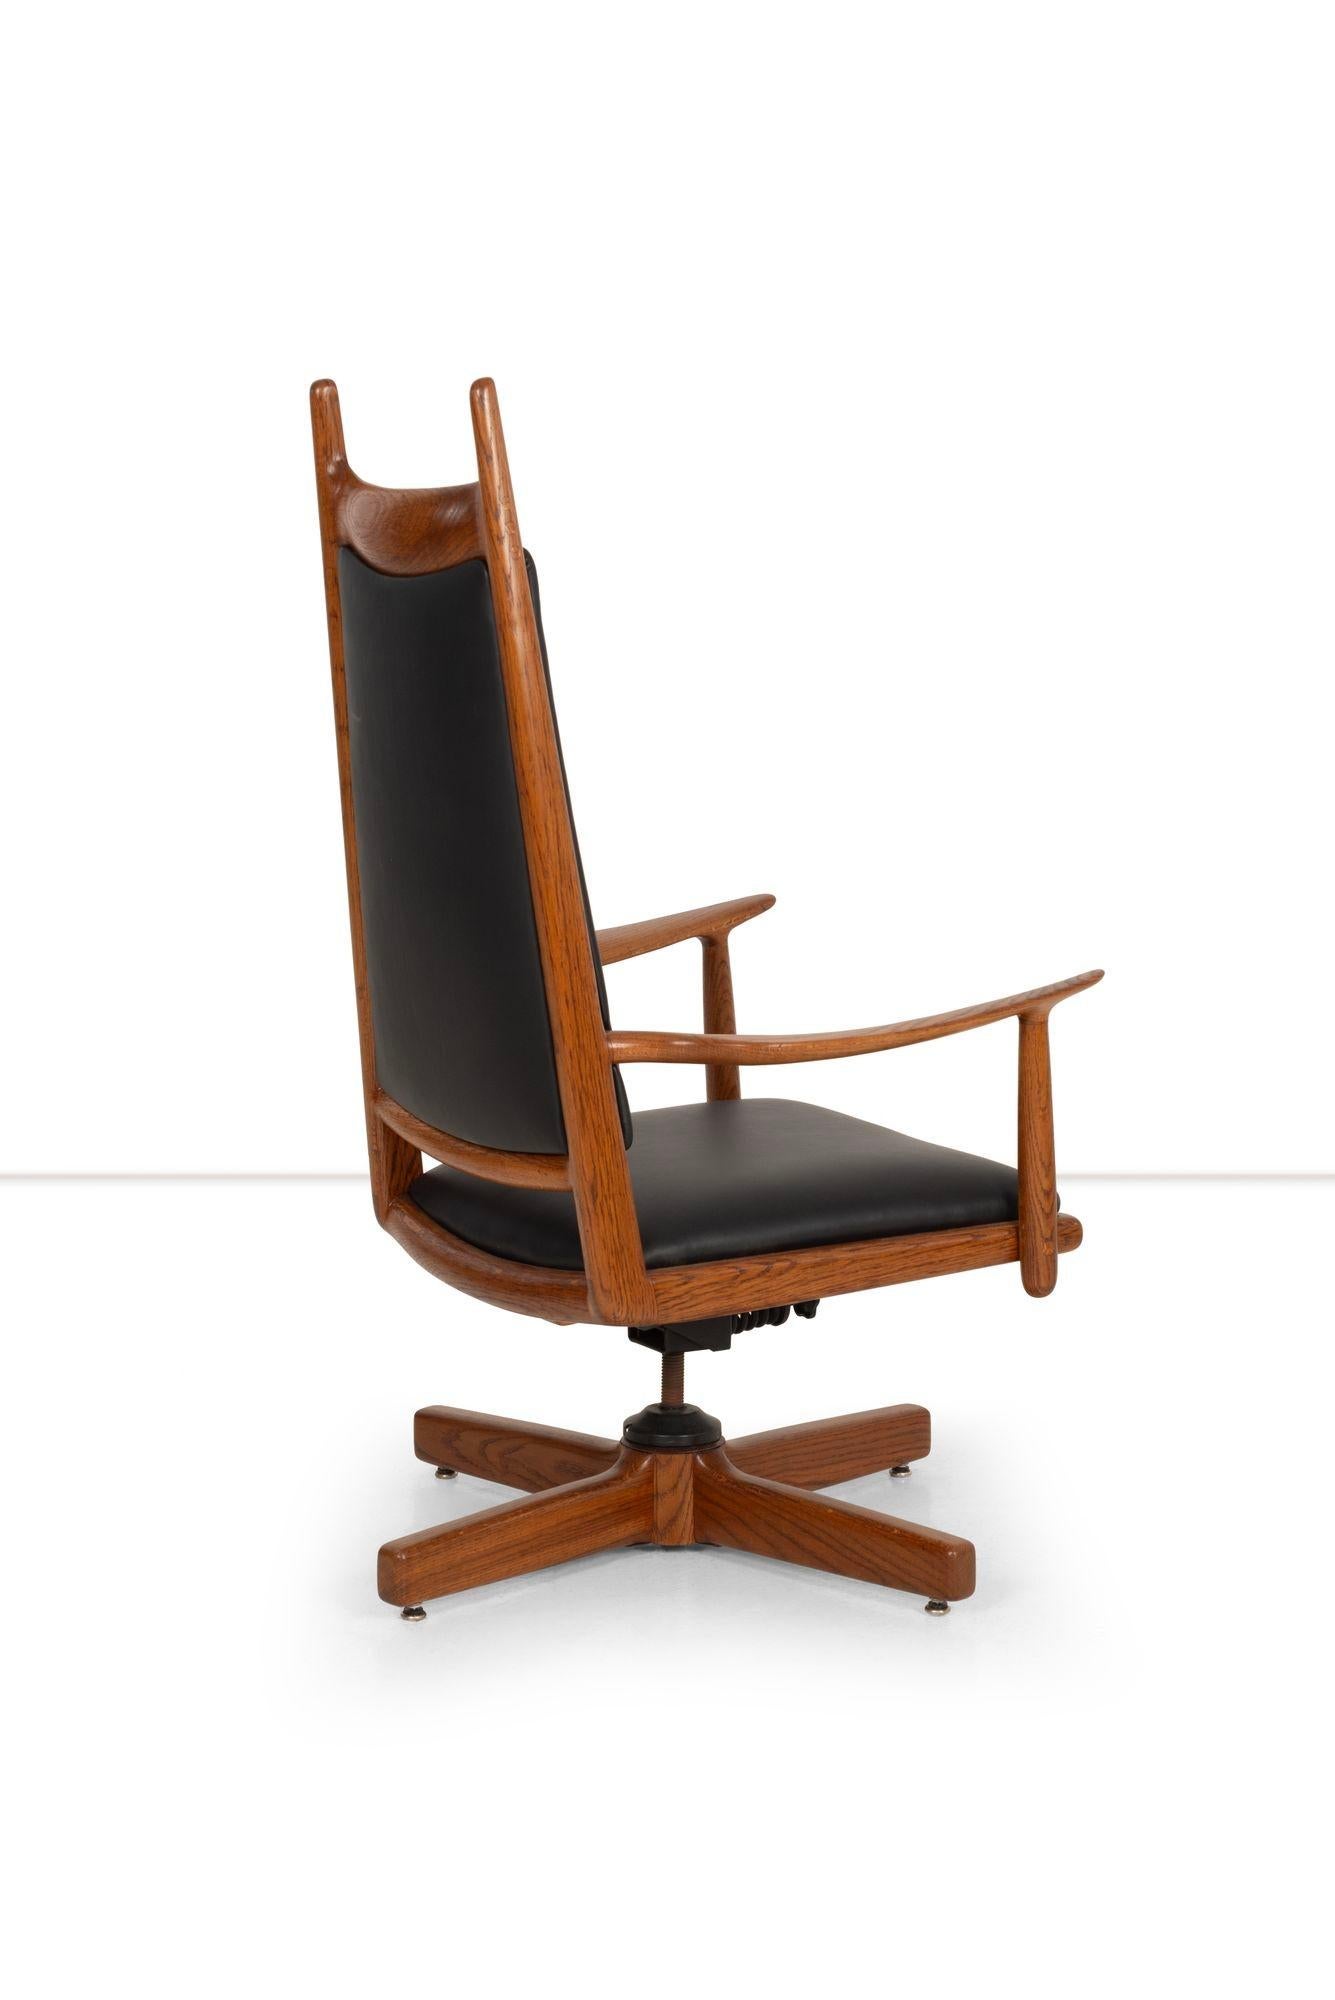 Leather Sam Maloof Highback Horned Desk Chair For Sale